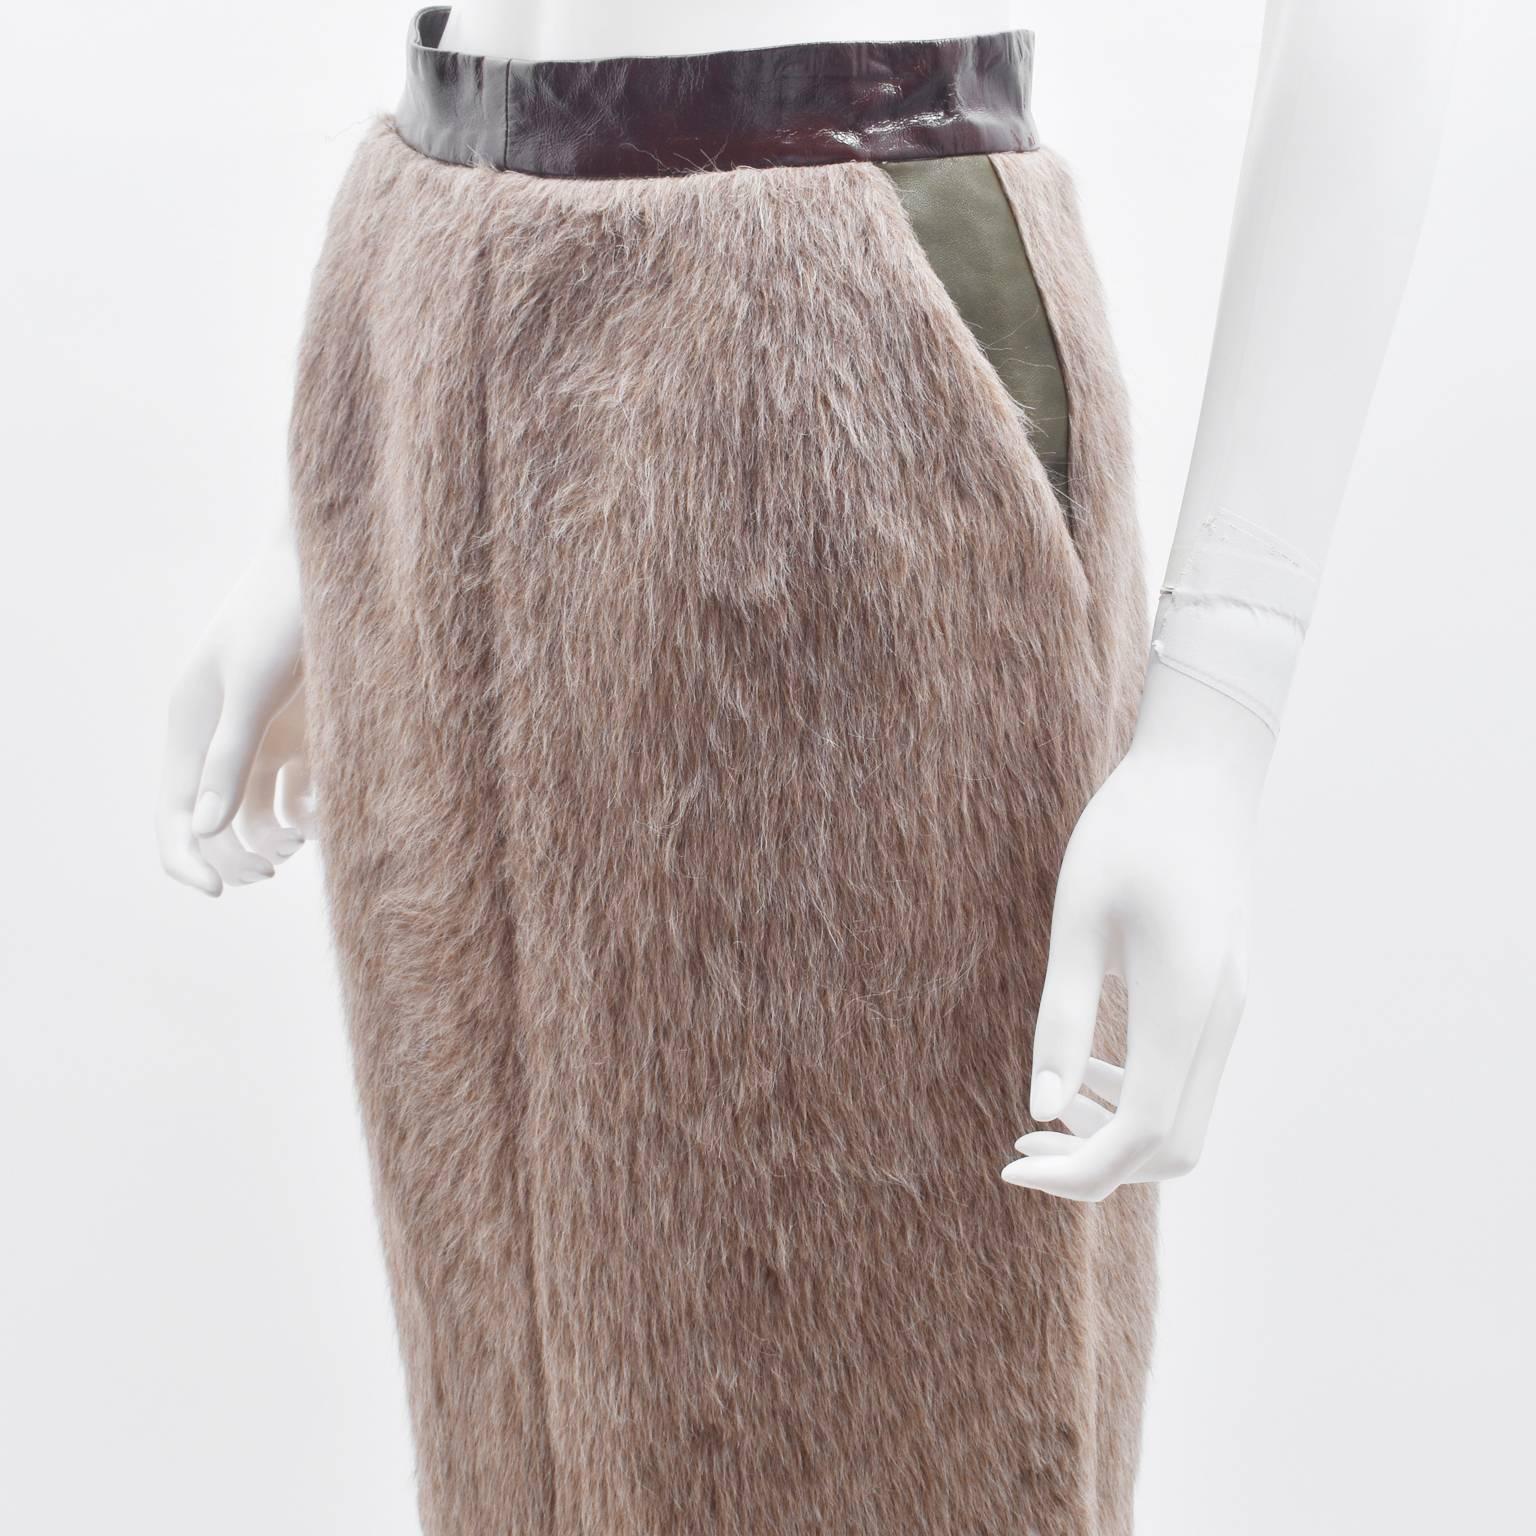 A beautiful Winter skirt from Celine’s A/W 2011 collection. The skirt has a simple A line shape with a high waisted fit. It has a Maroon patent leather waistband connected to the camel coloured faux fur skirt. It also features khaki leather pockets